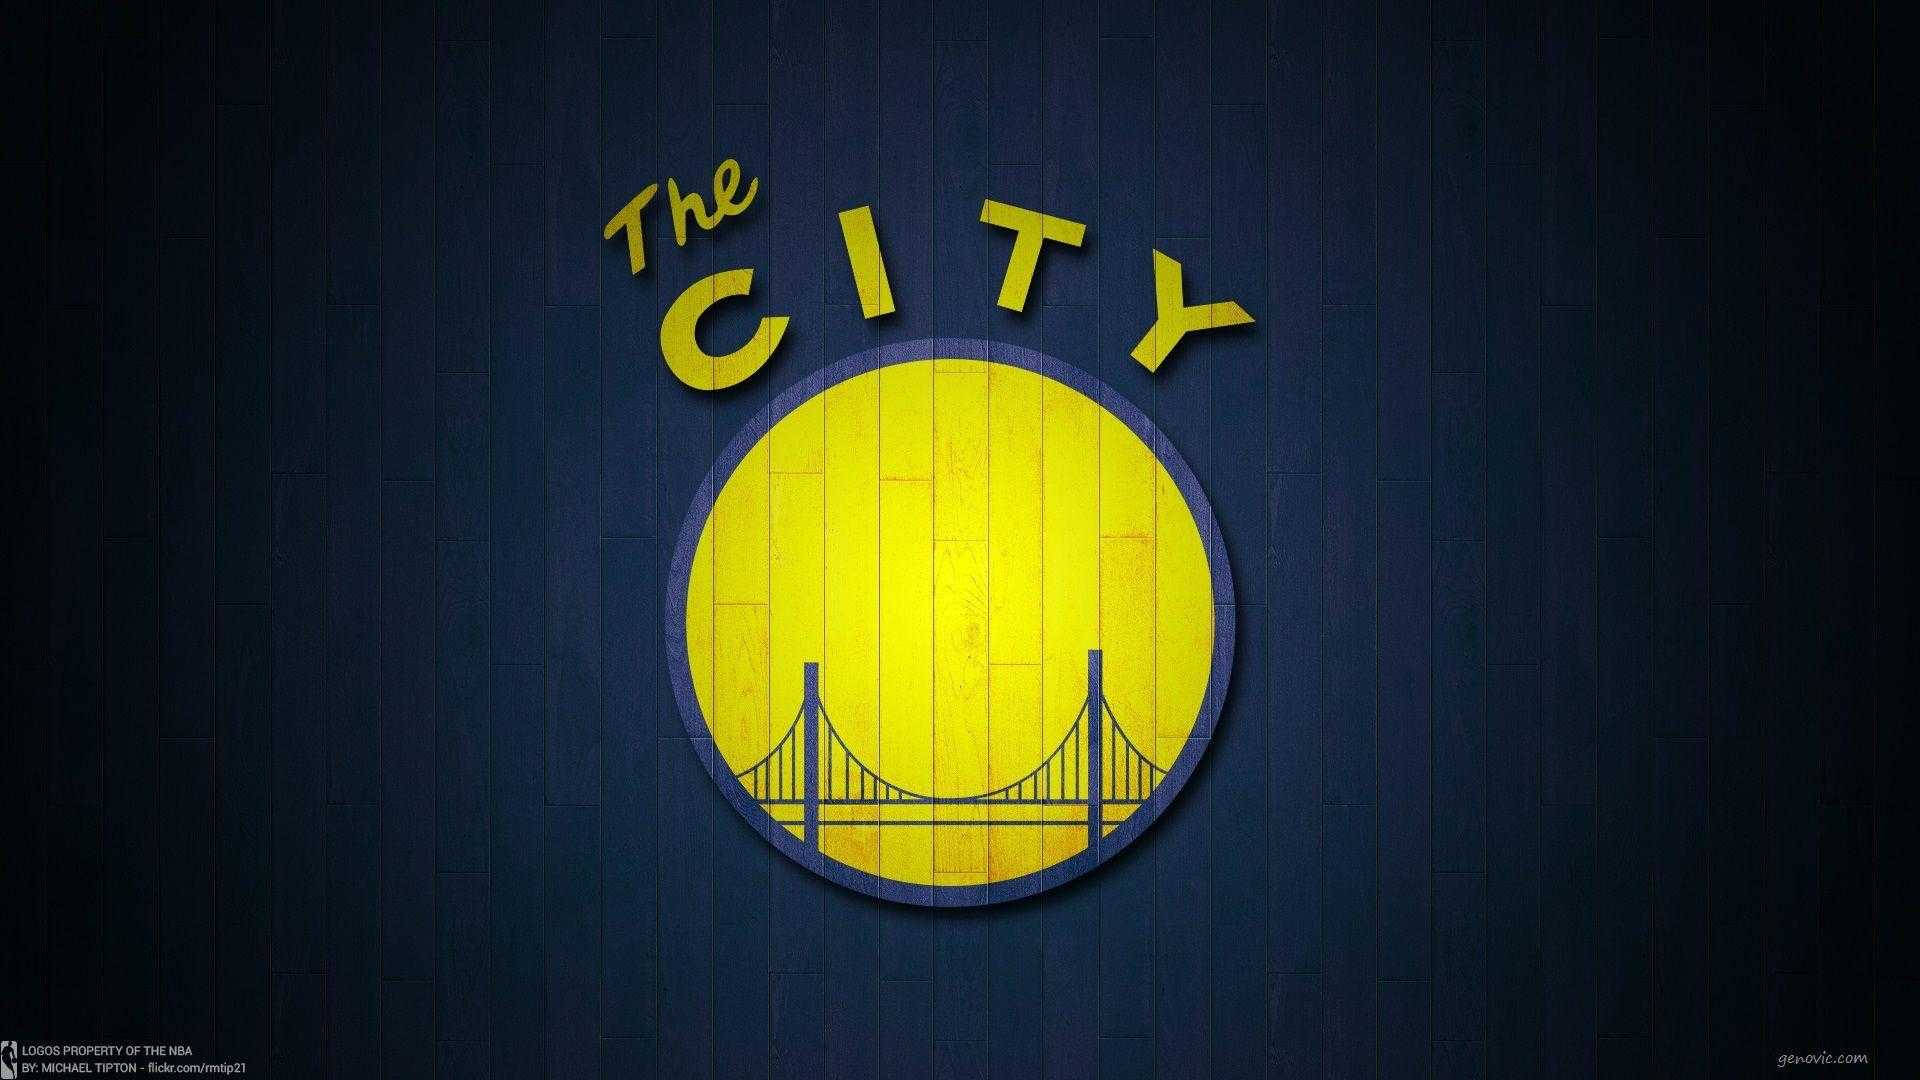 Golden State Warriors The City Artwork Background